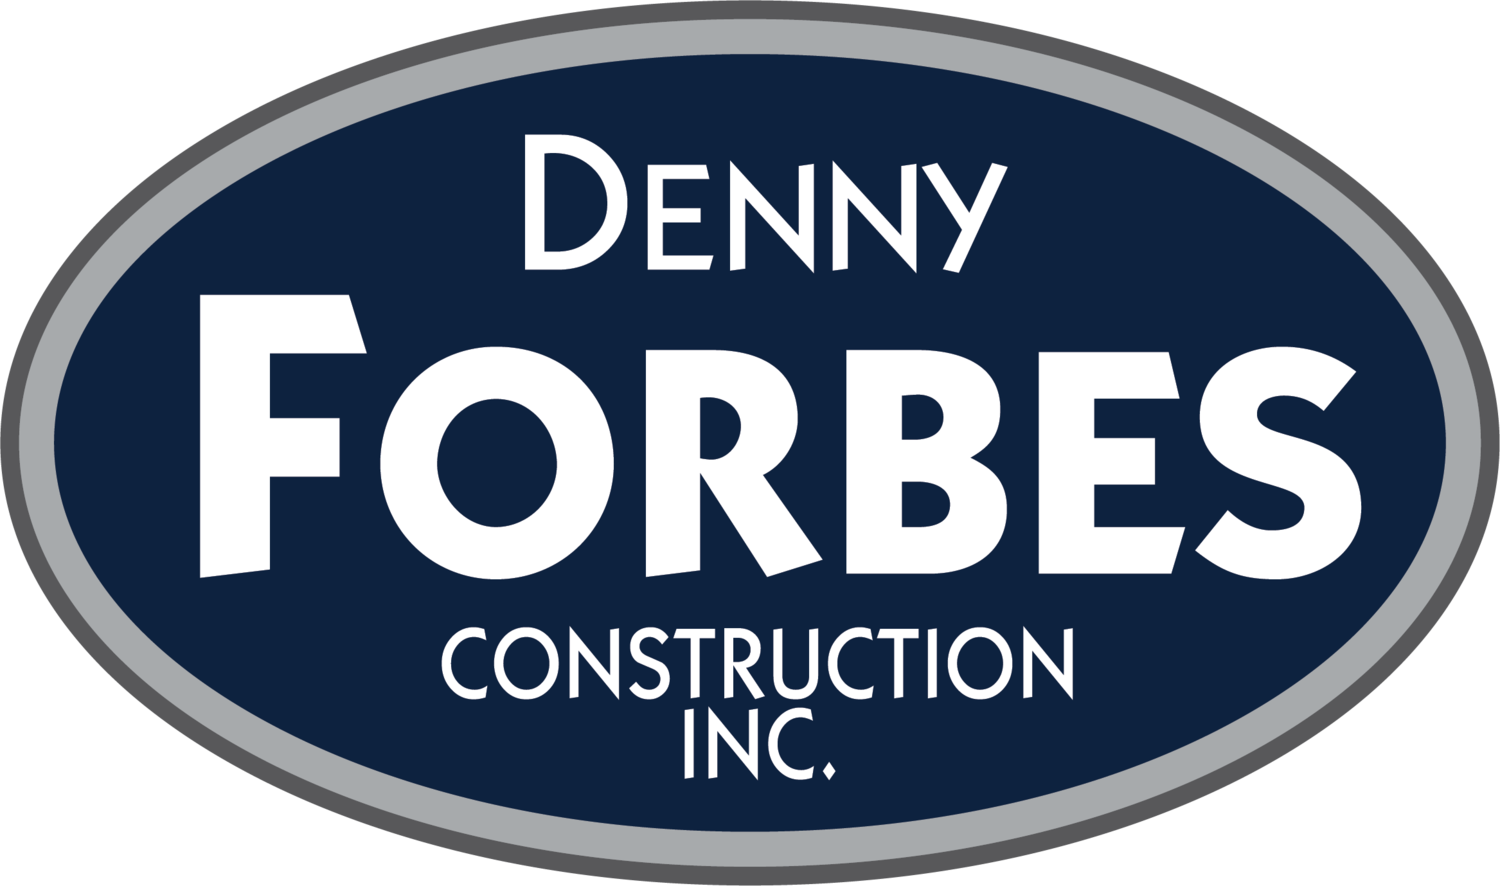 Denny Forbes Construction Inc.